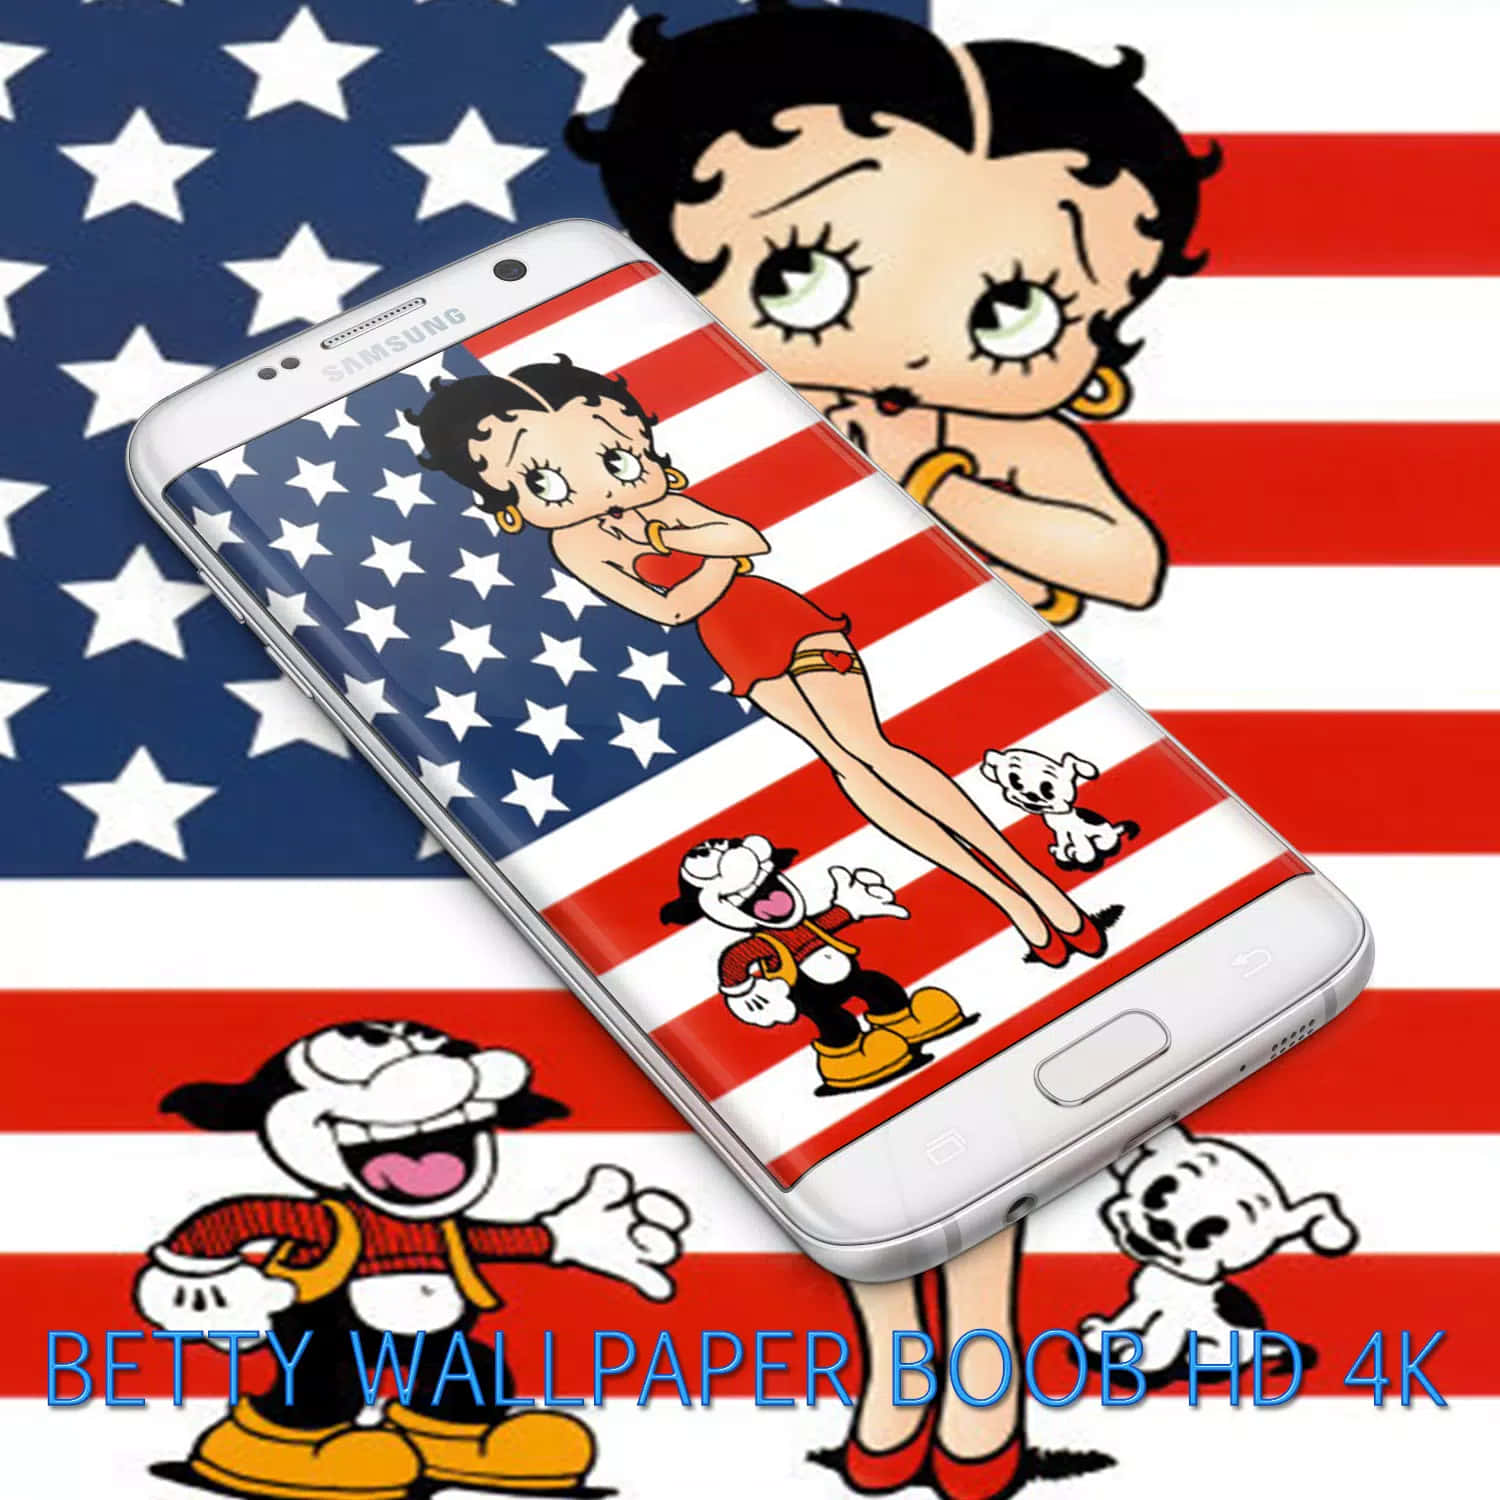 "Celebrate the Holiday Season with Betty Boop!" Wallpaper